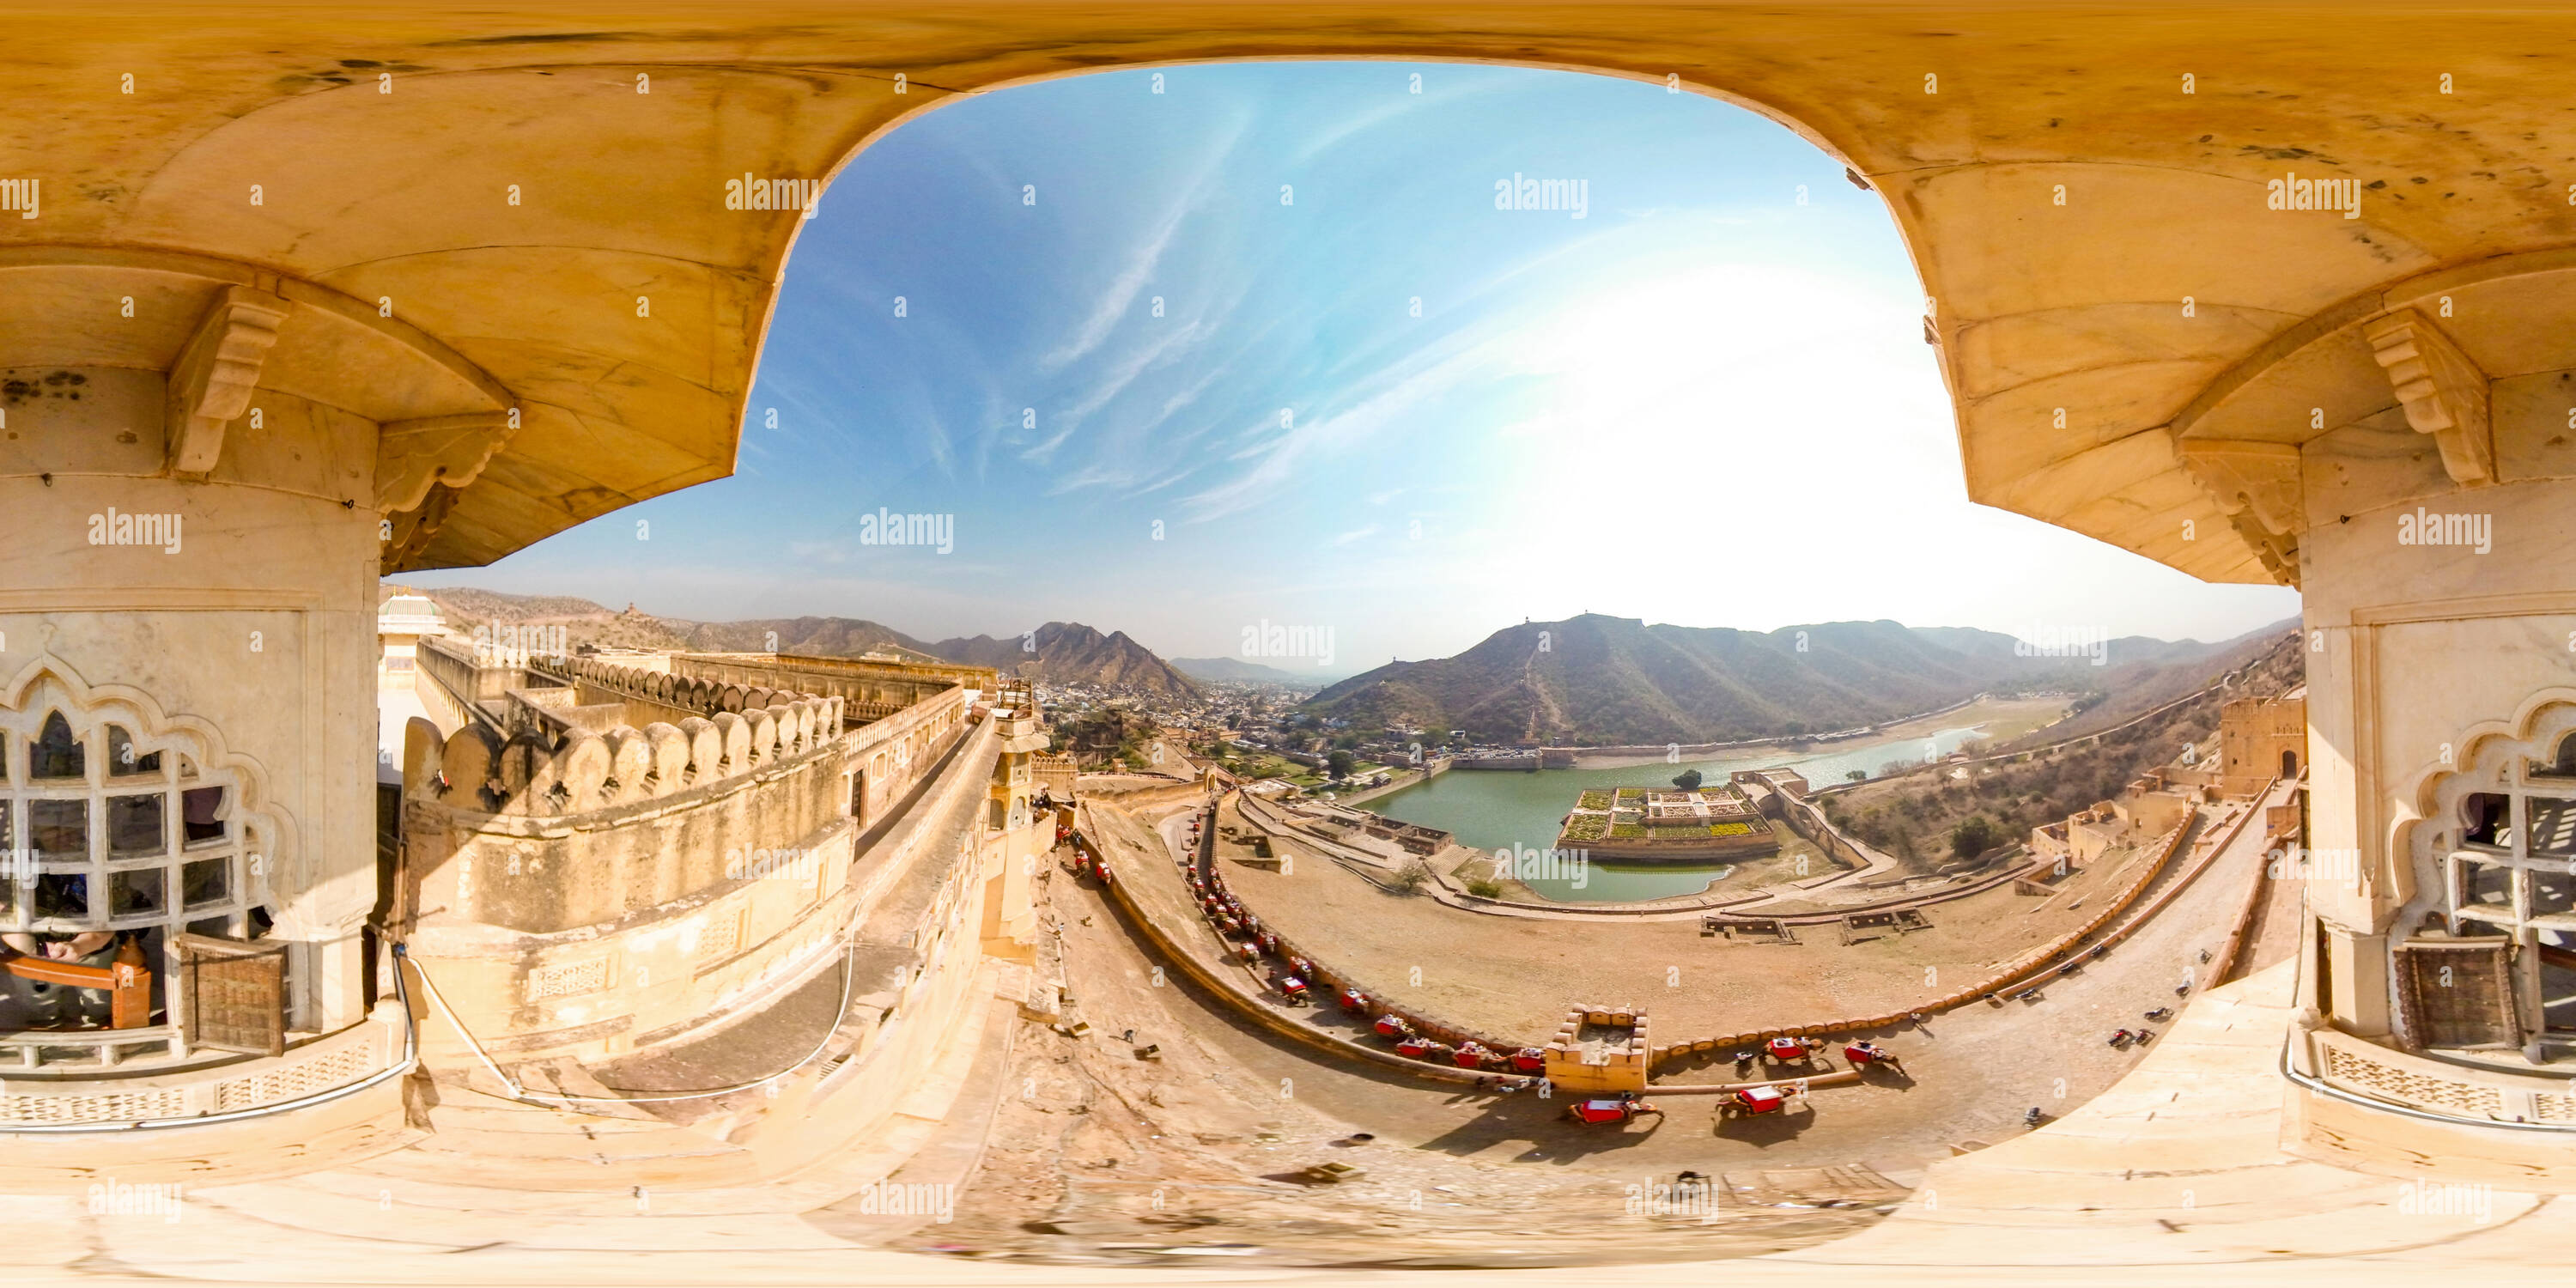 360 degree panoramic view of View over Suraj Pol, Amber Palace, Rajasthan, India